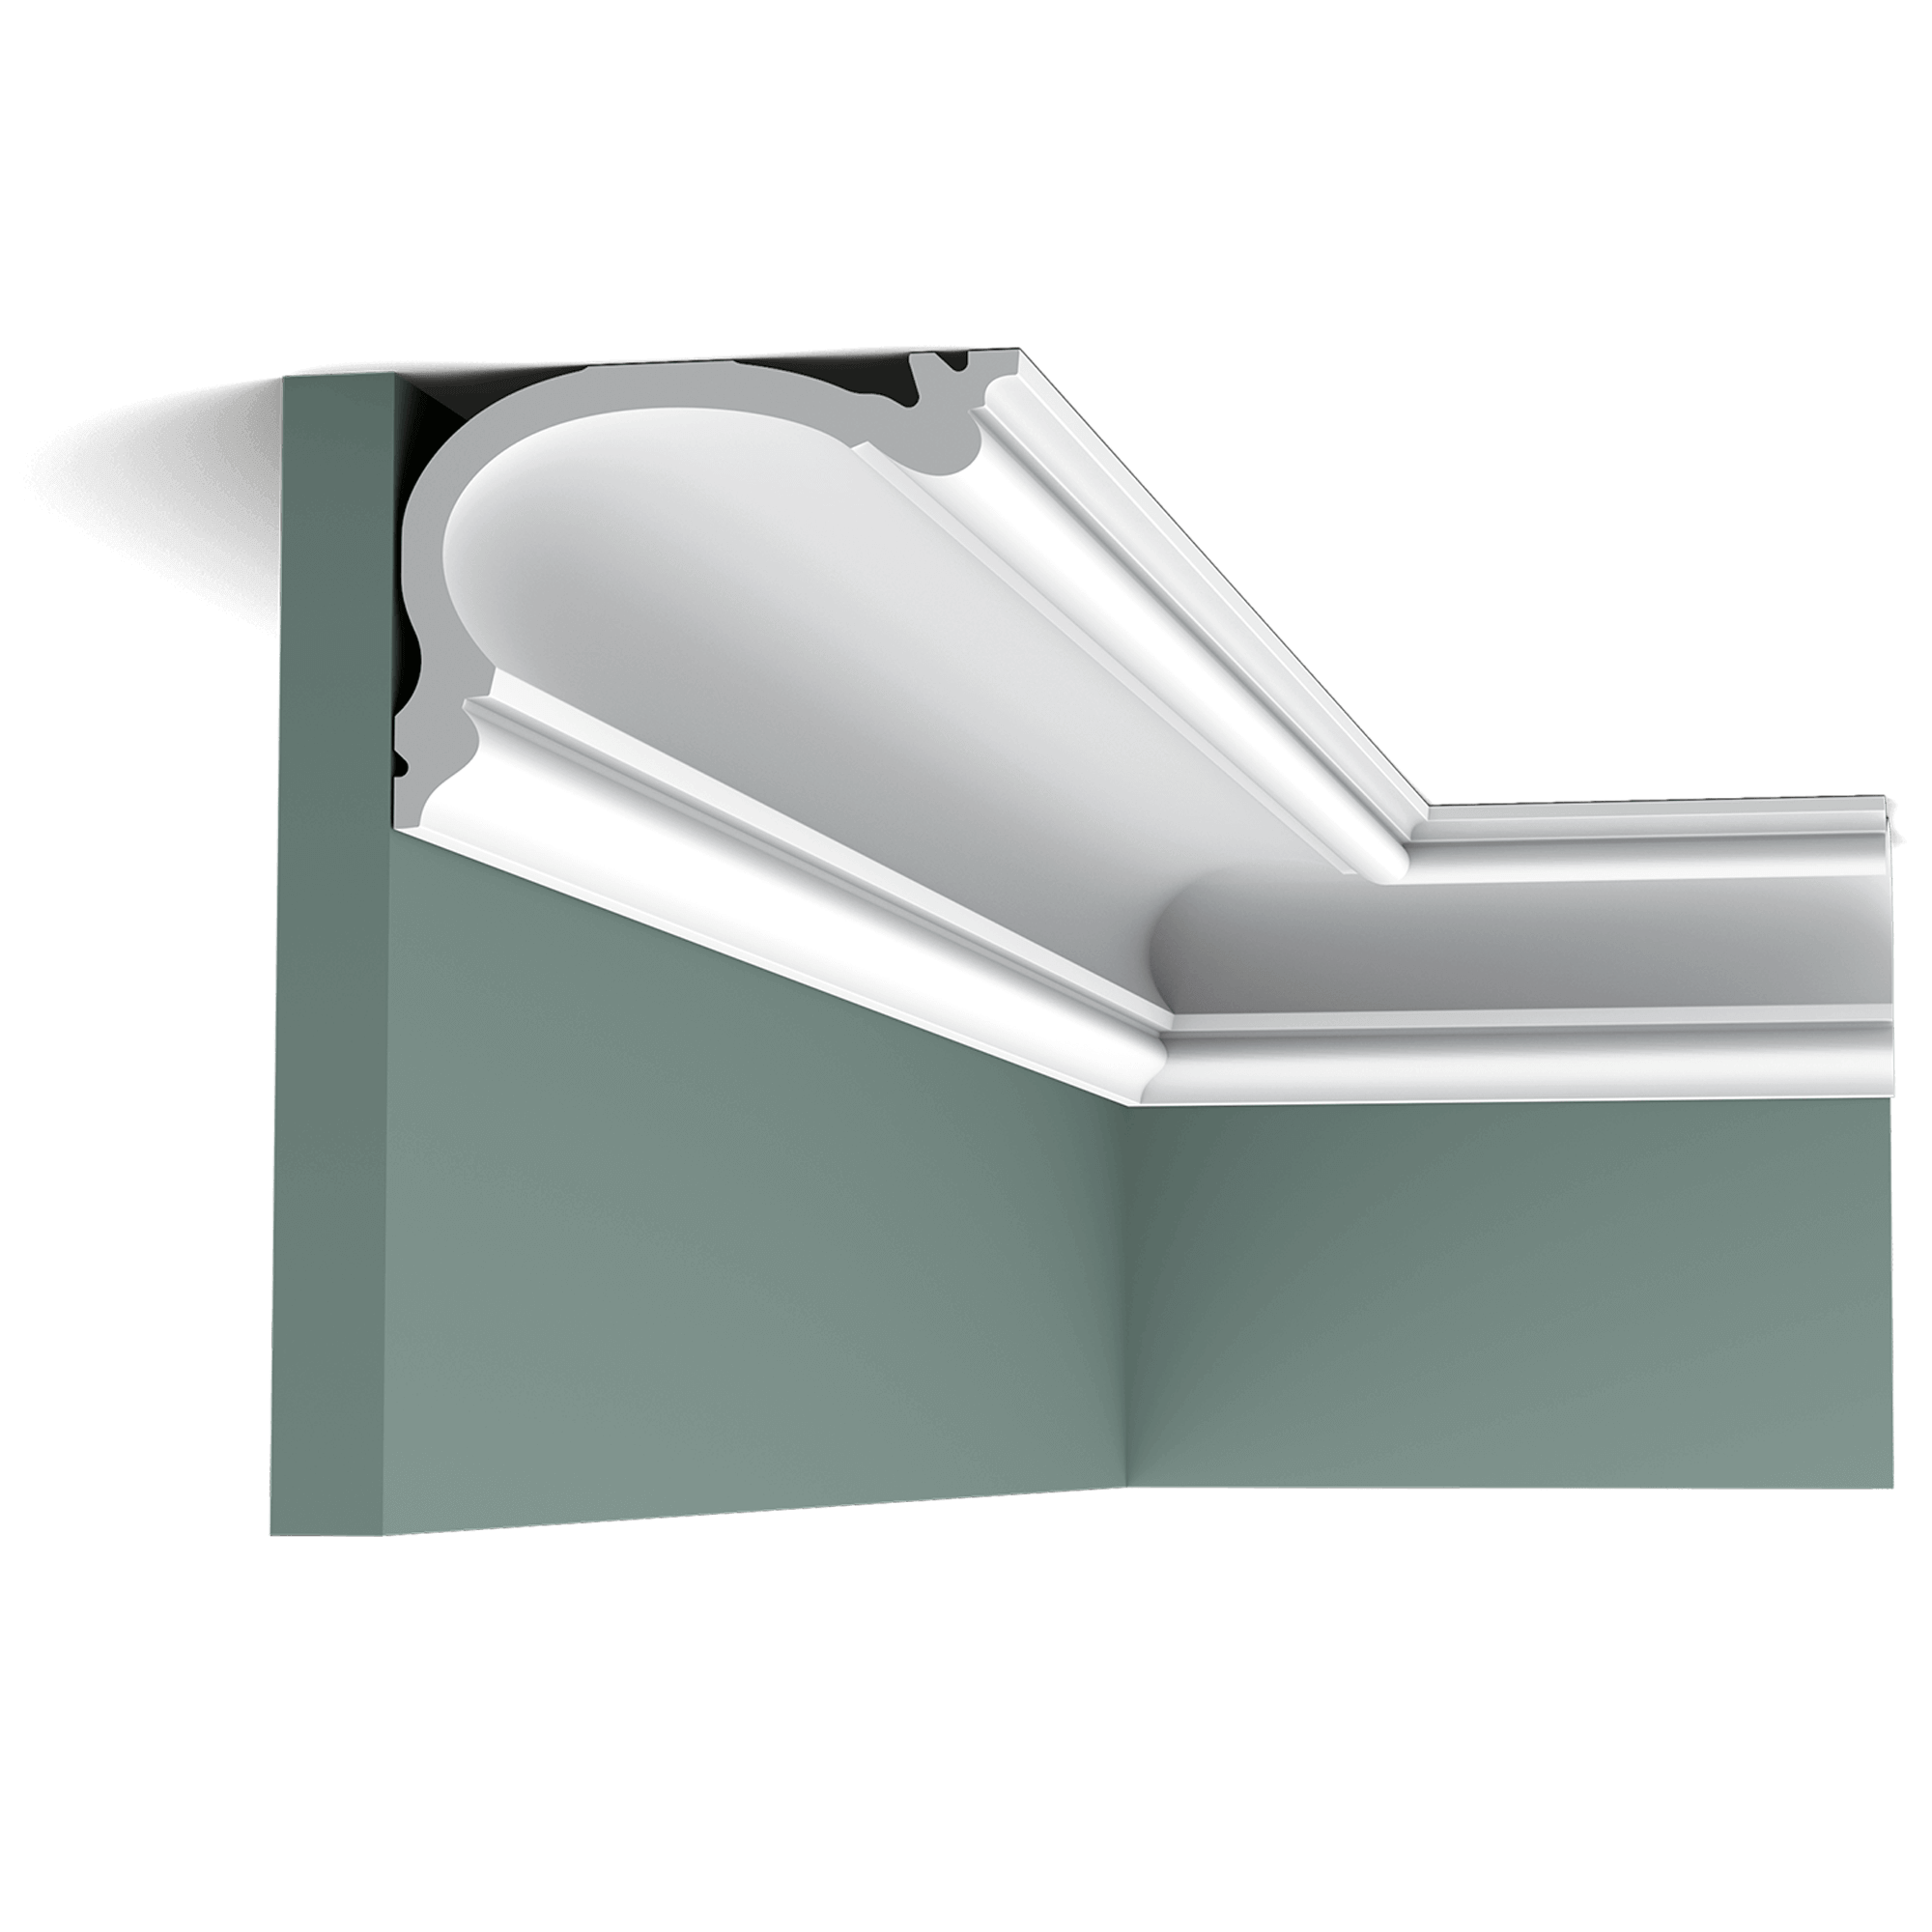 c341 cornice moulding 39c0 The smallest member of the HERITAGE family. A stately classic cornice moulding inspired by the rich heritage of English country homes.